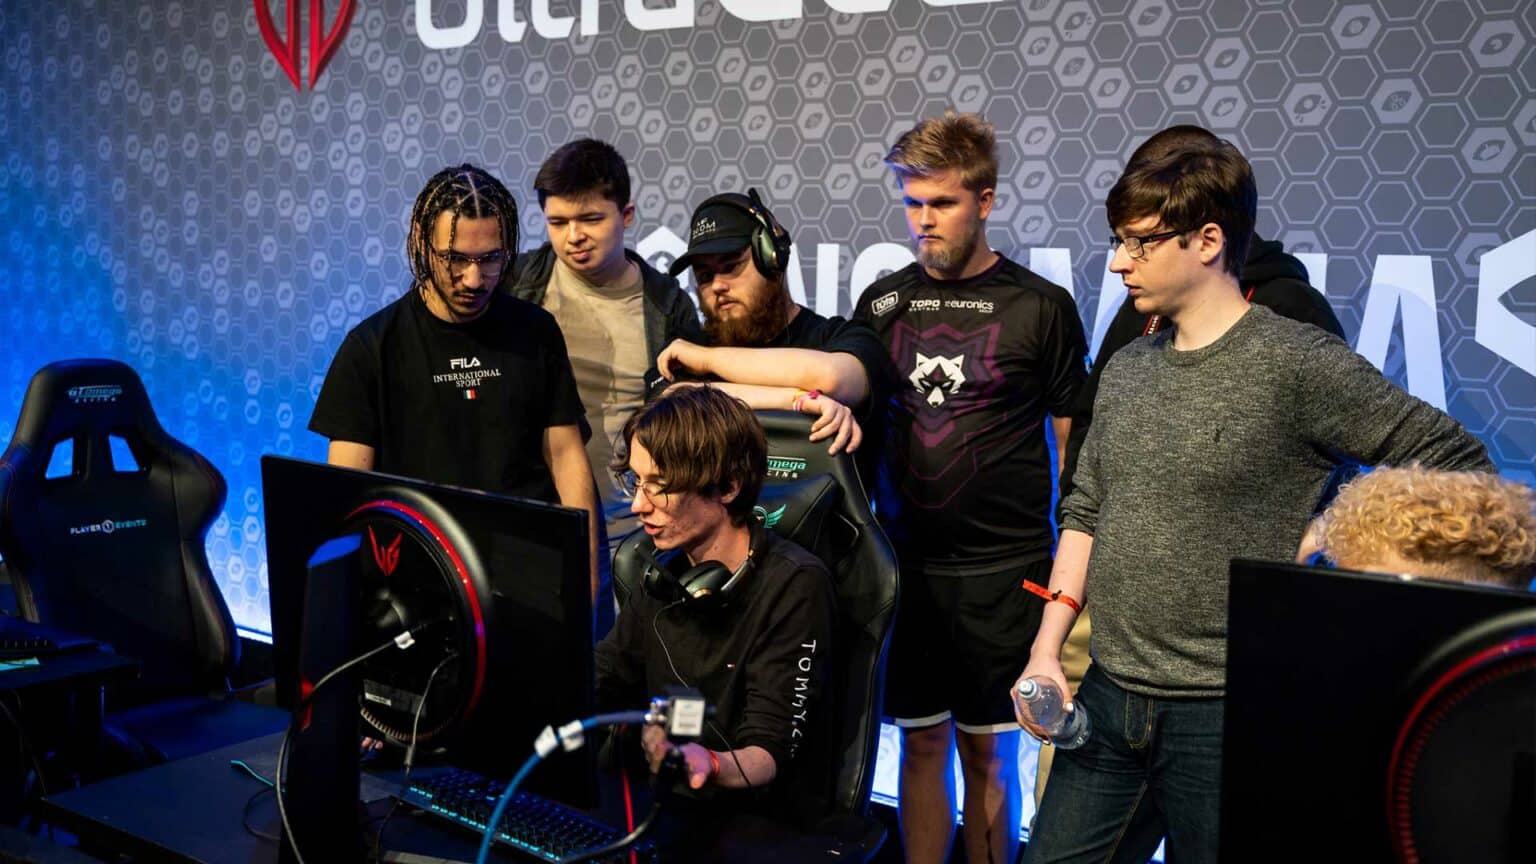 A group of men watching someone play video games on a computer at Insomnia the gaming festival